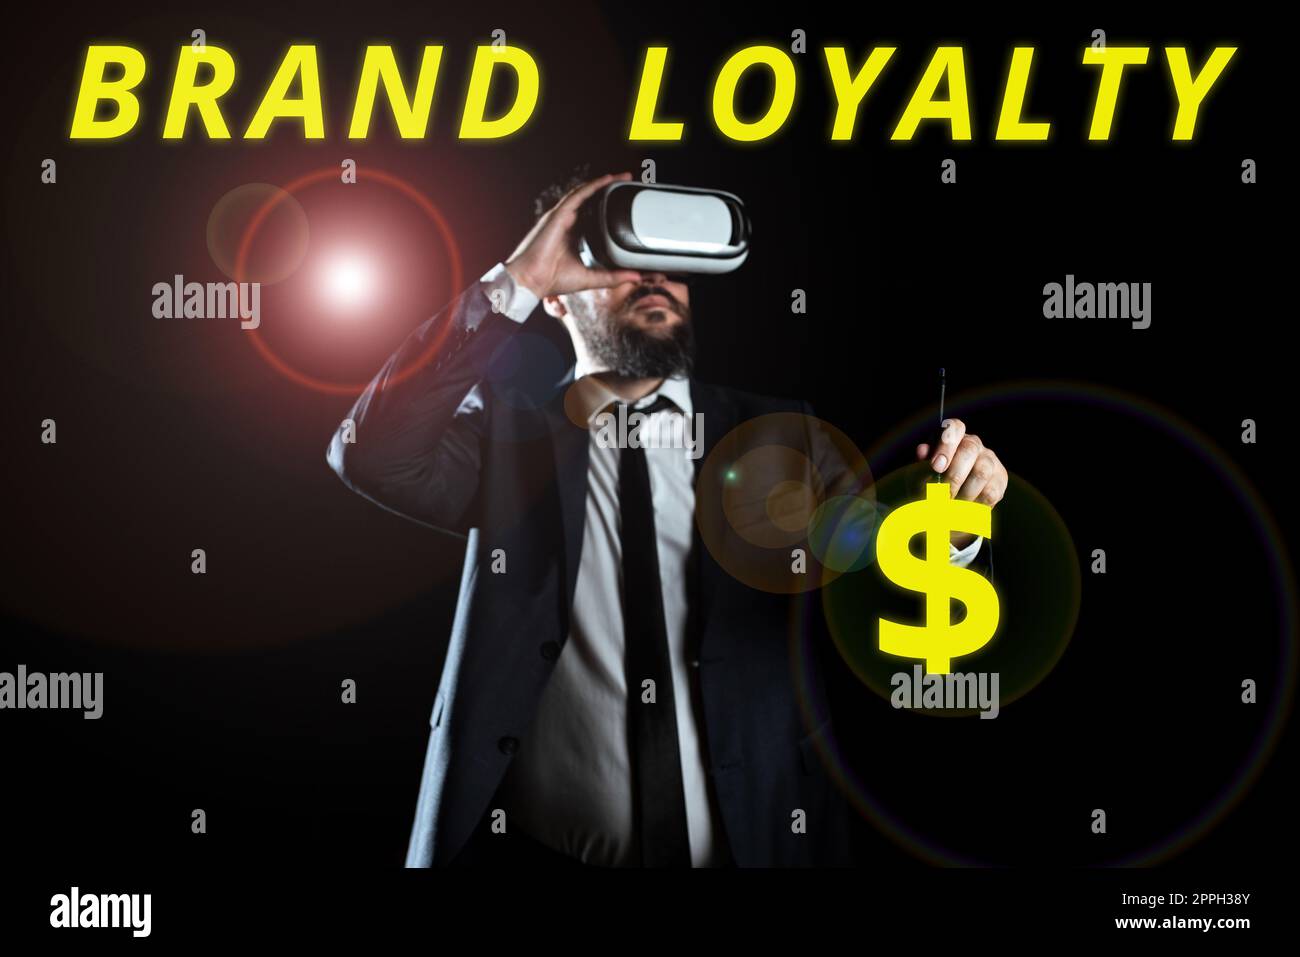 Sign displaying Brand Loyalty. Business idea Repeat Purchase Ambassador Patronage Favorite Trusted Stock Photo